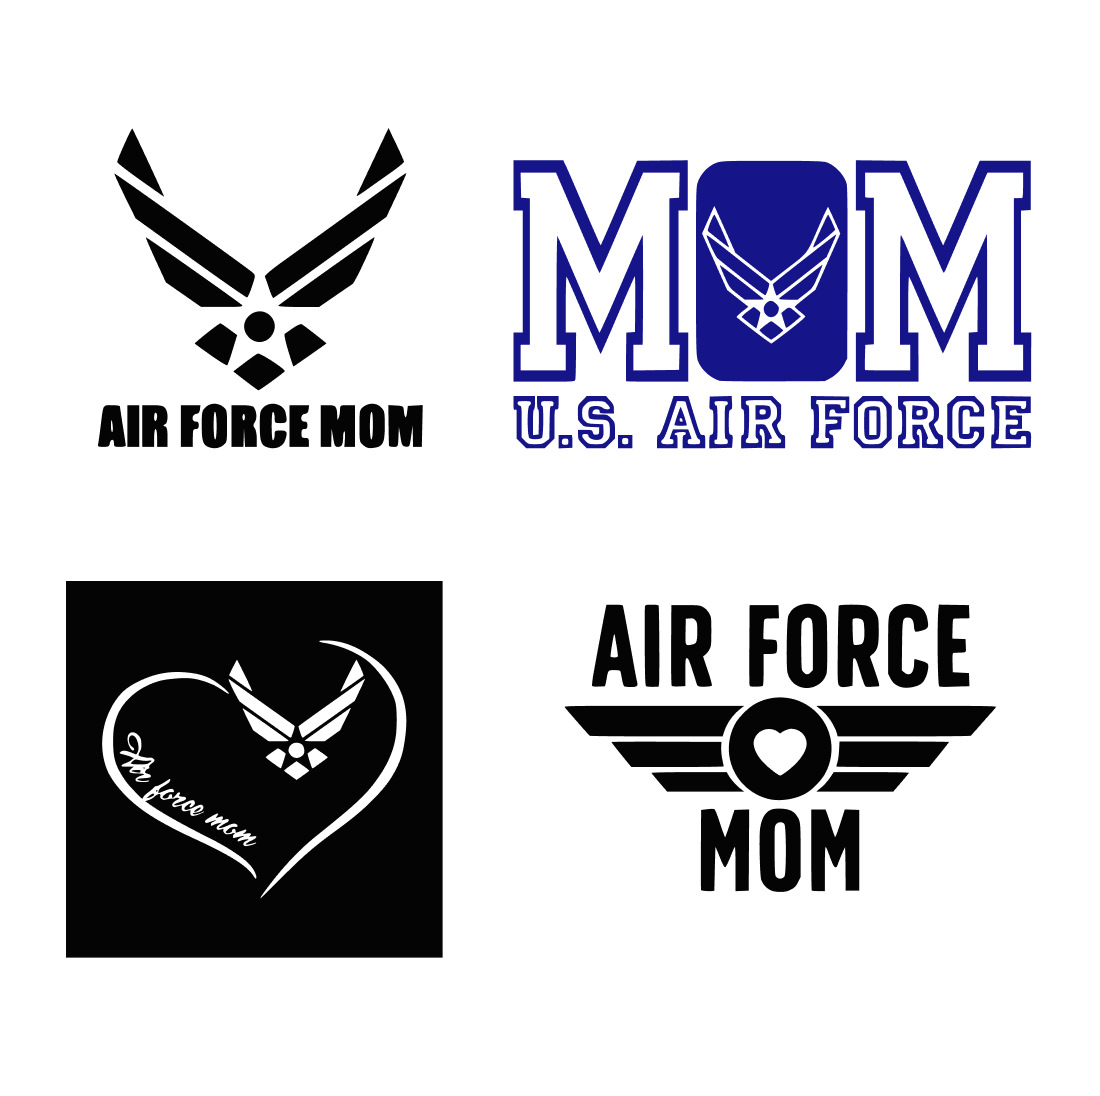 Image of hearts and stars as the symbol of the Air Force Mom SVG Bundle.